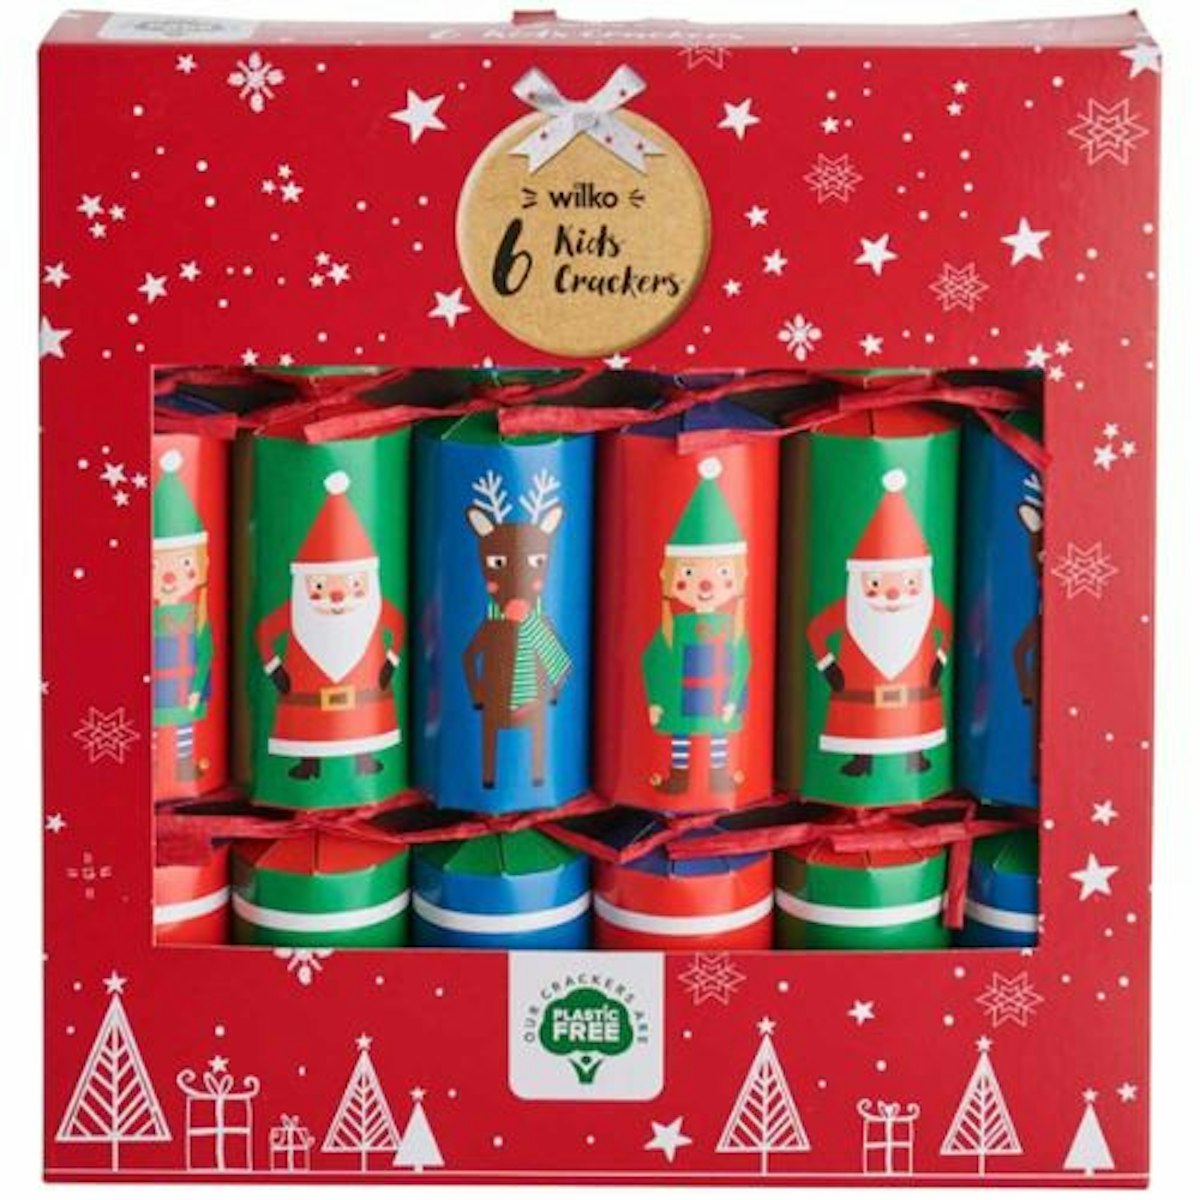 Best Christmas crackers for kids